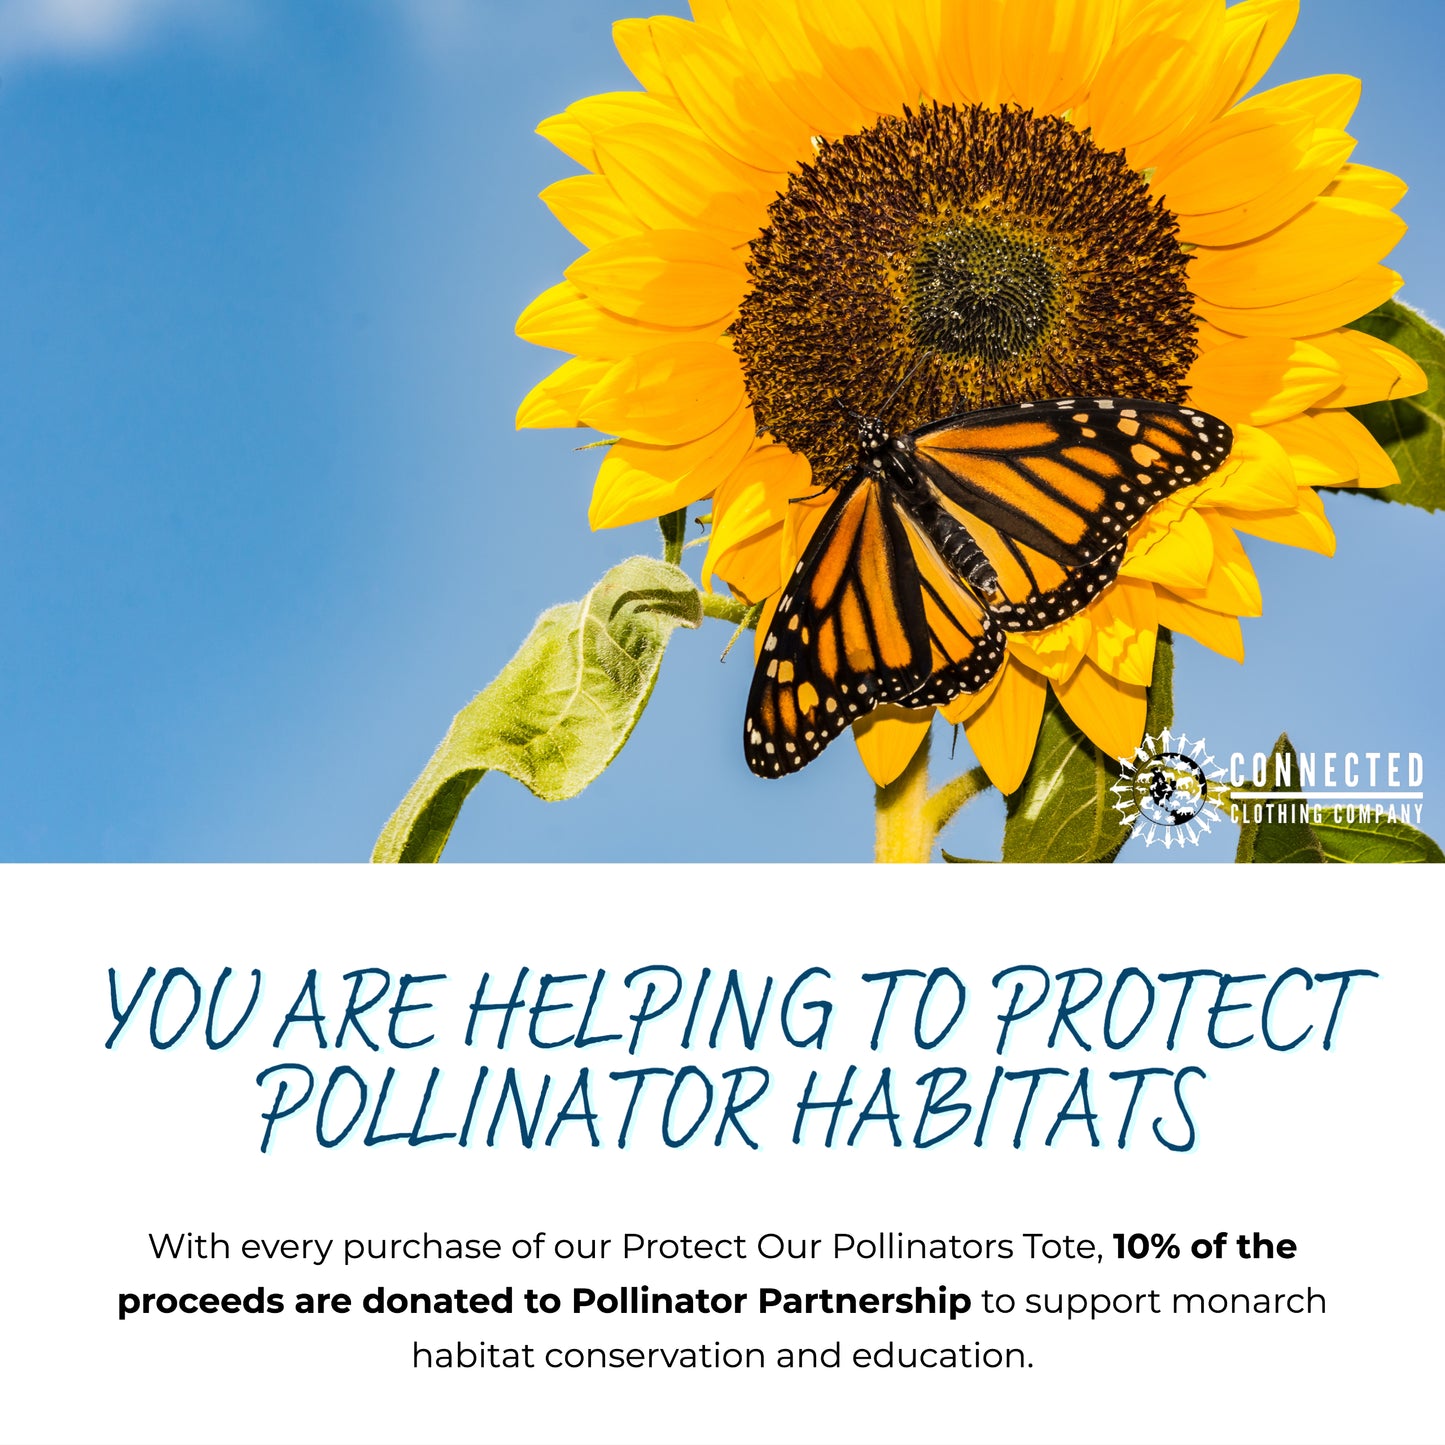 YOU ARE HELPING TO PROTECT POLLINATOR HABITATS. With every purchase of our Protect Our Pollinators Tote, 10% of the proceeds are donated to Pollinator Partnership to support monarch habitat conservation and education.